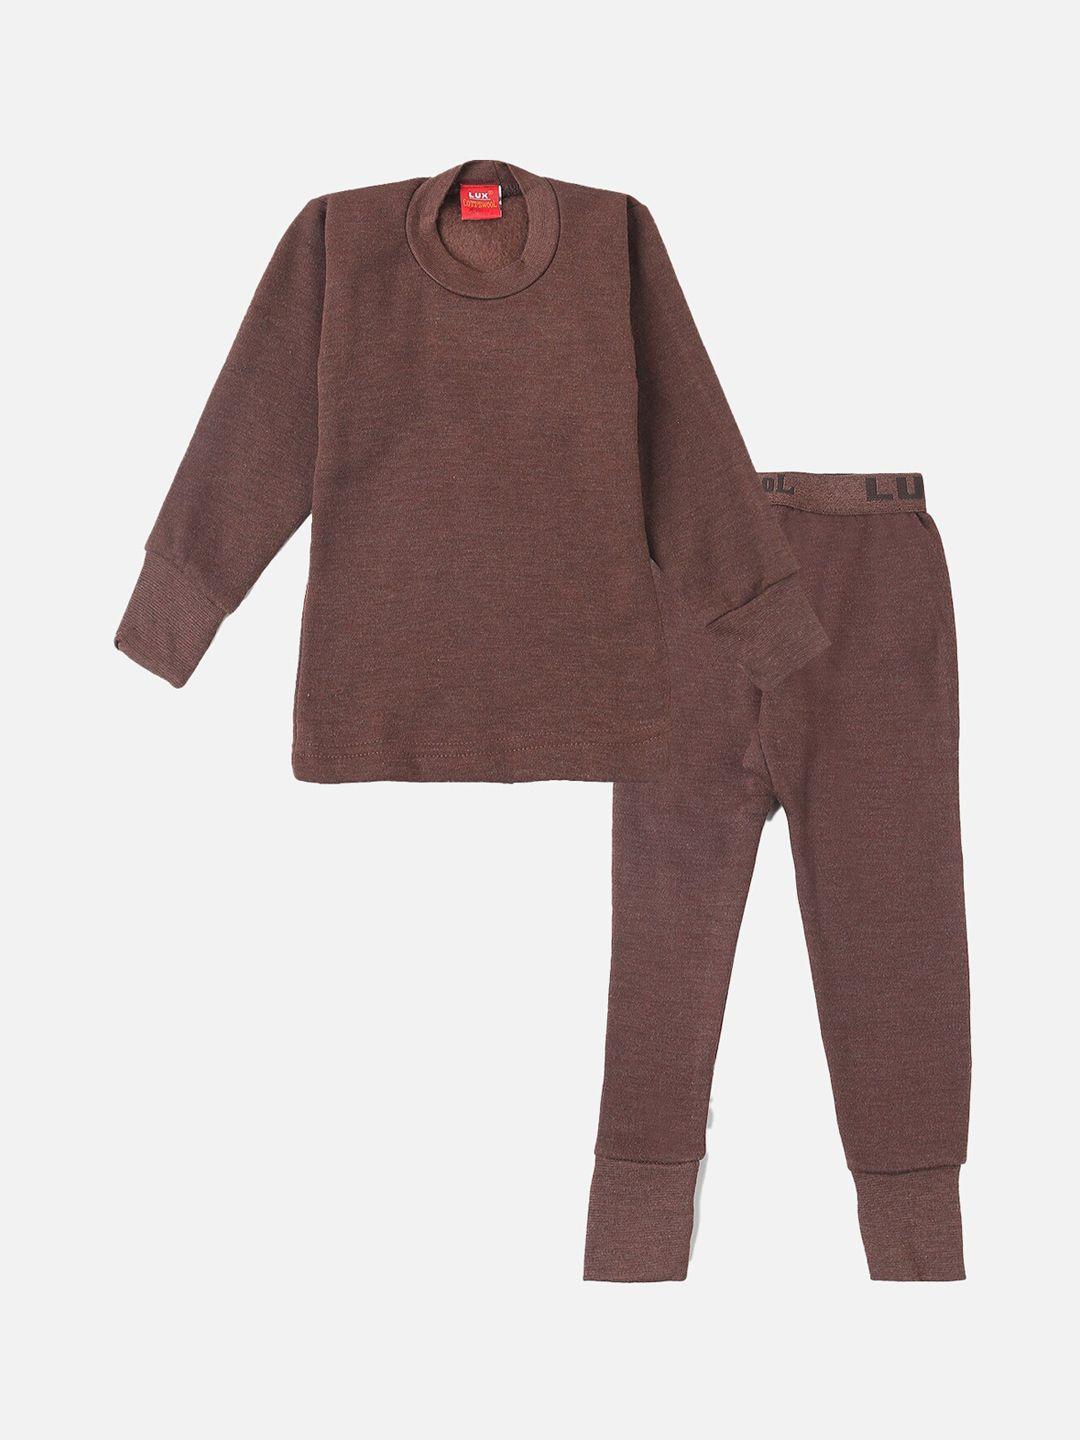 Lux Cottswool Boys Brown Solid Cotton Slim-Fit Thermal Set